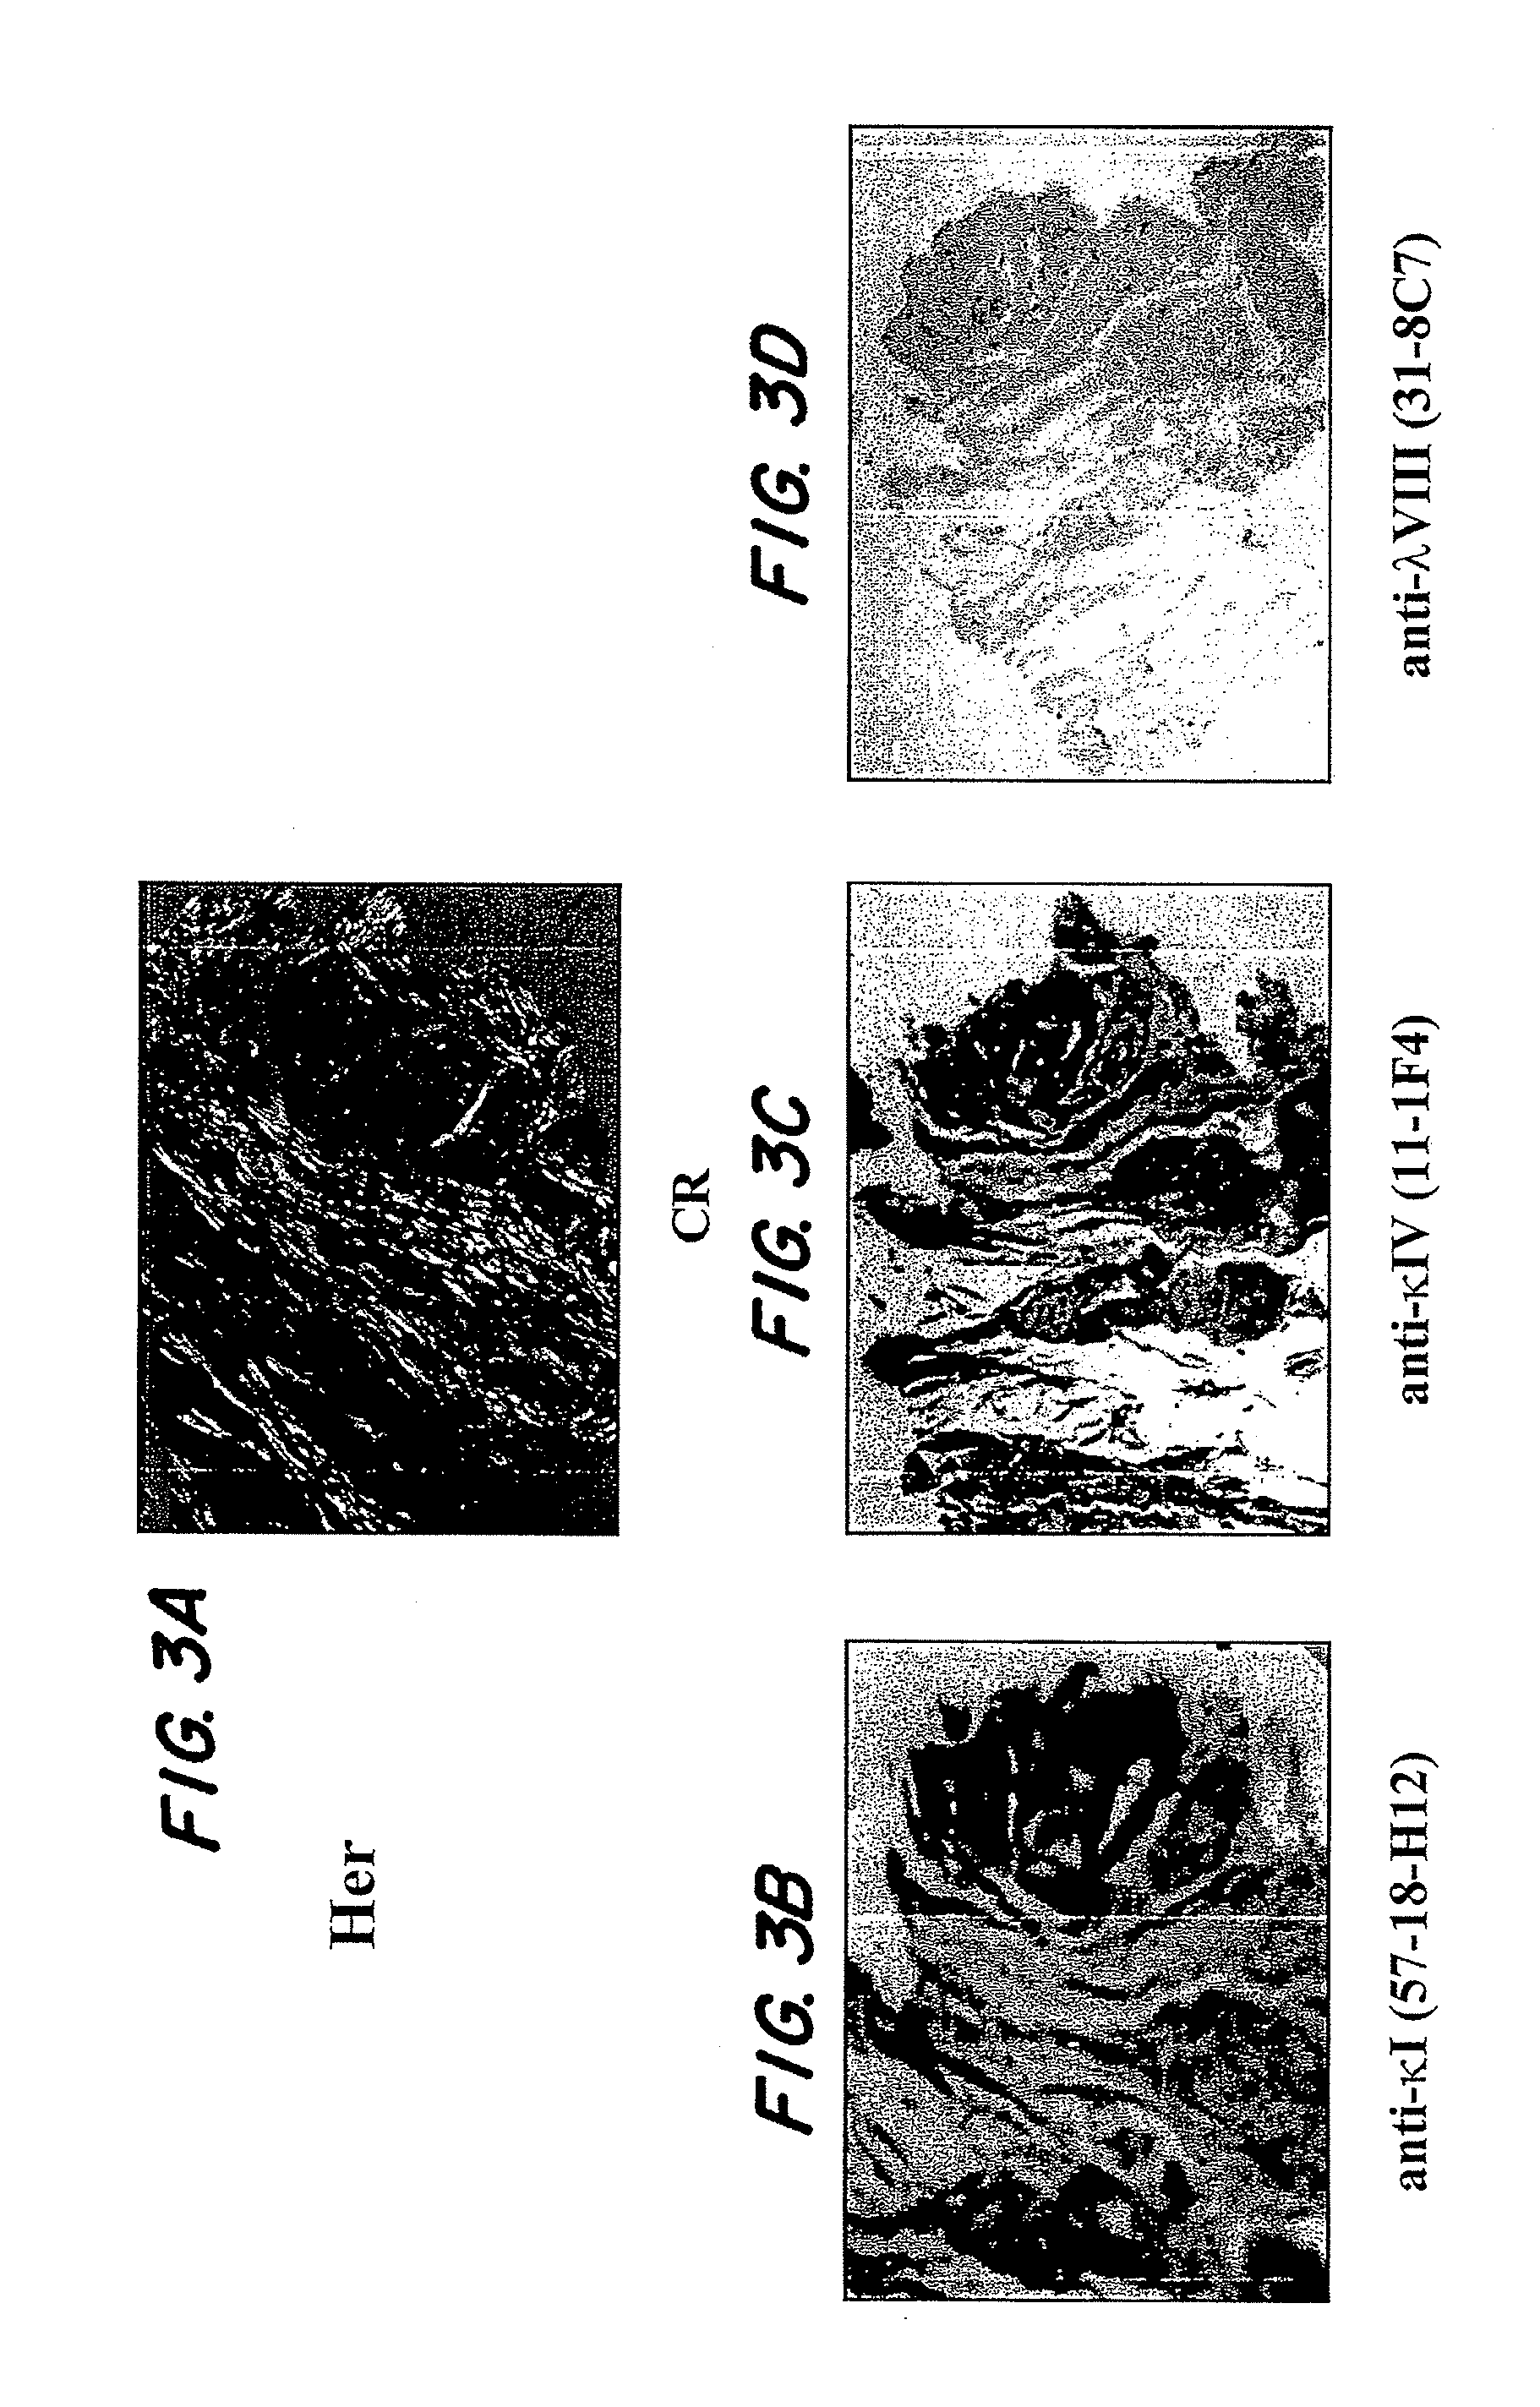 Methods for amyloid removal using anti-amyloid antibodies